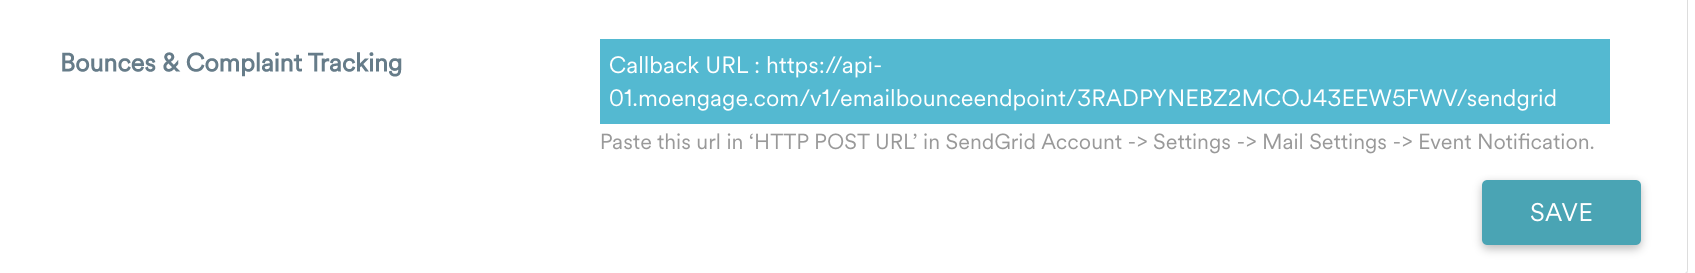 EmailSettings_Bounces_and_Complaint_Tracking.png